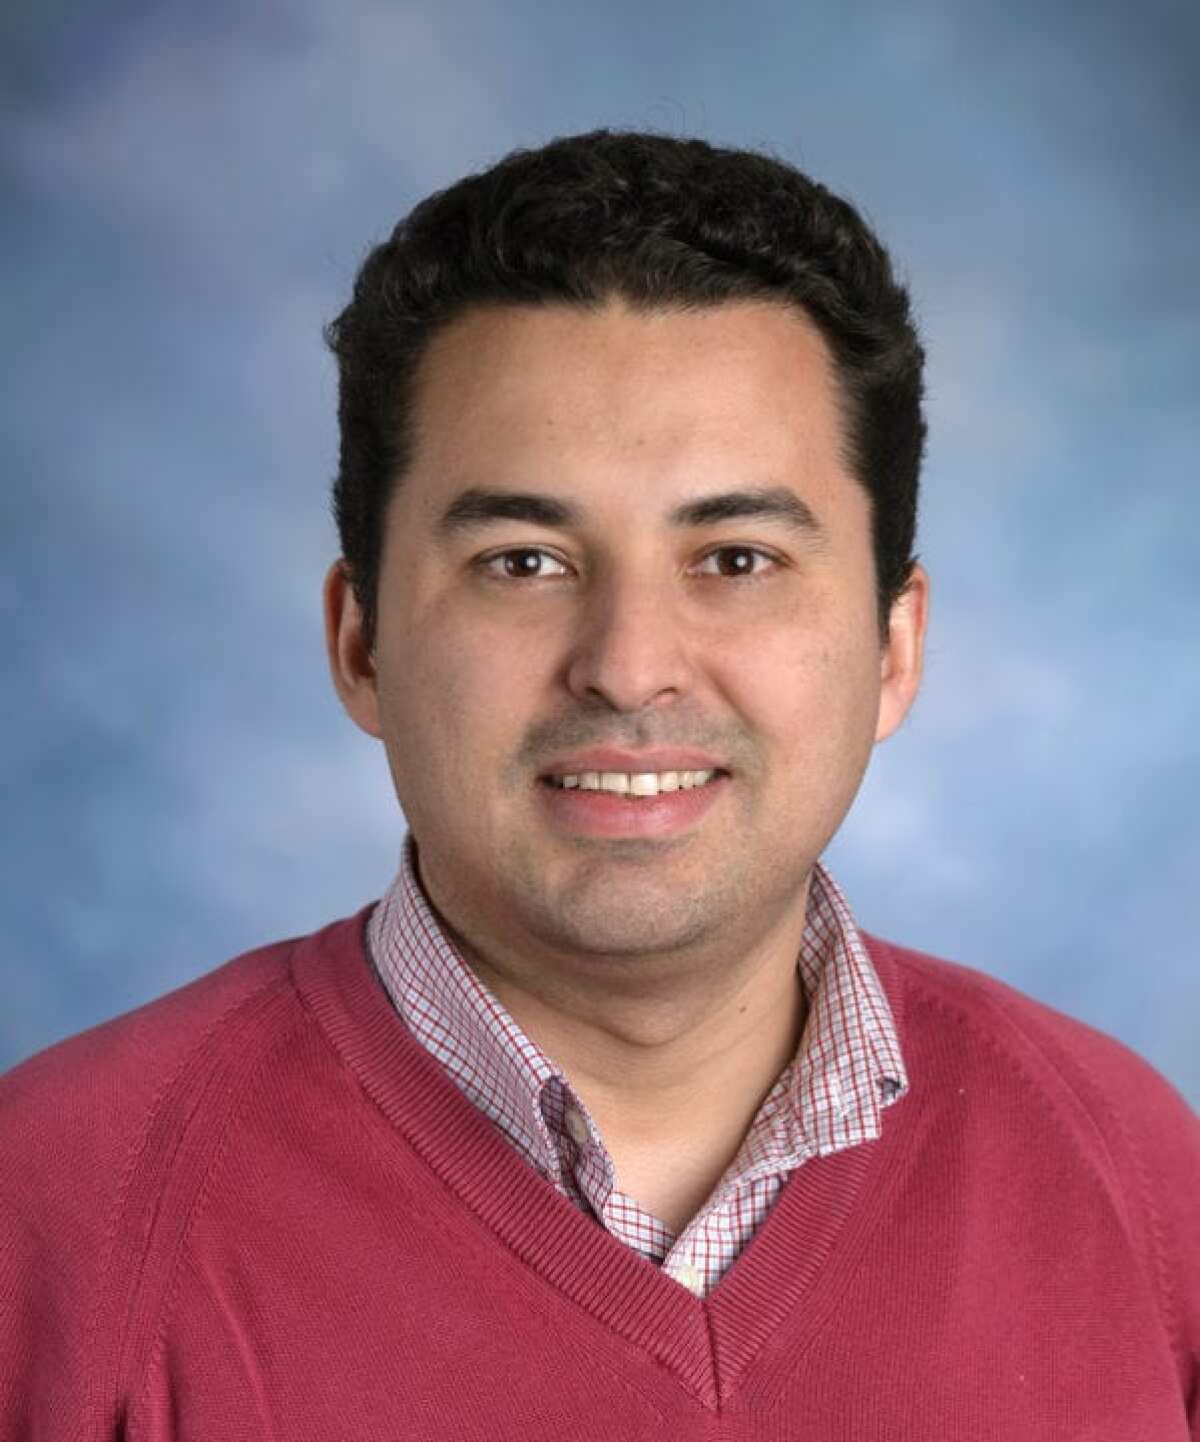 Gerardo Chowell is a professor of mathematical epidemiology at Georgia State University.